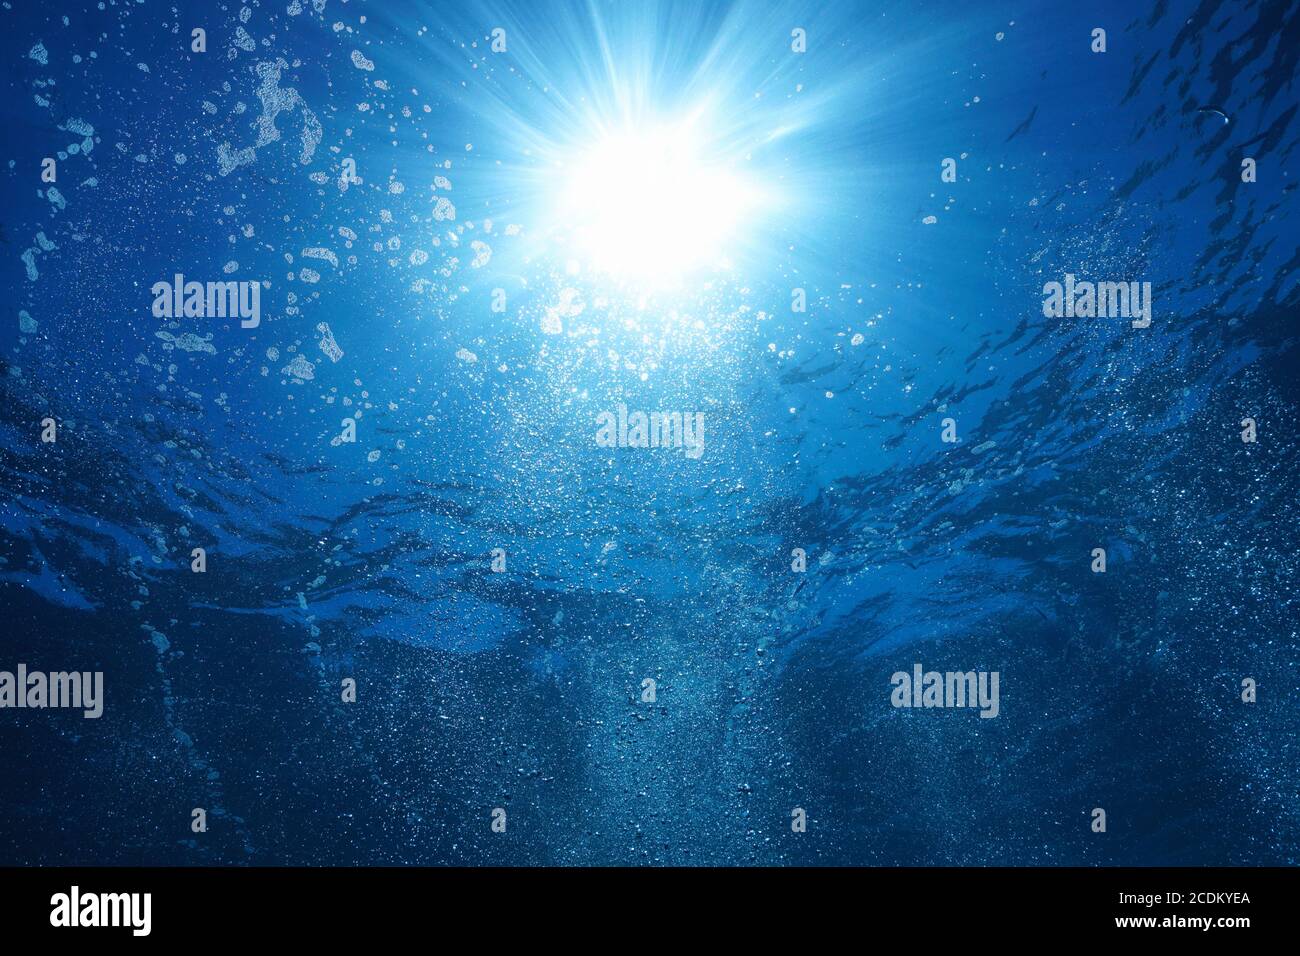 Sunshine with air bubbles underwater in the ocean, natural scene Stock Photo